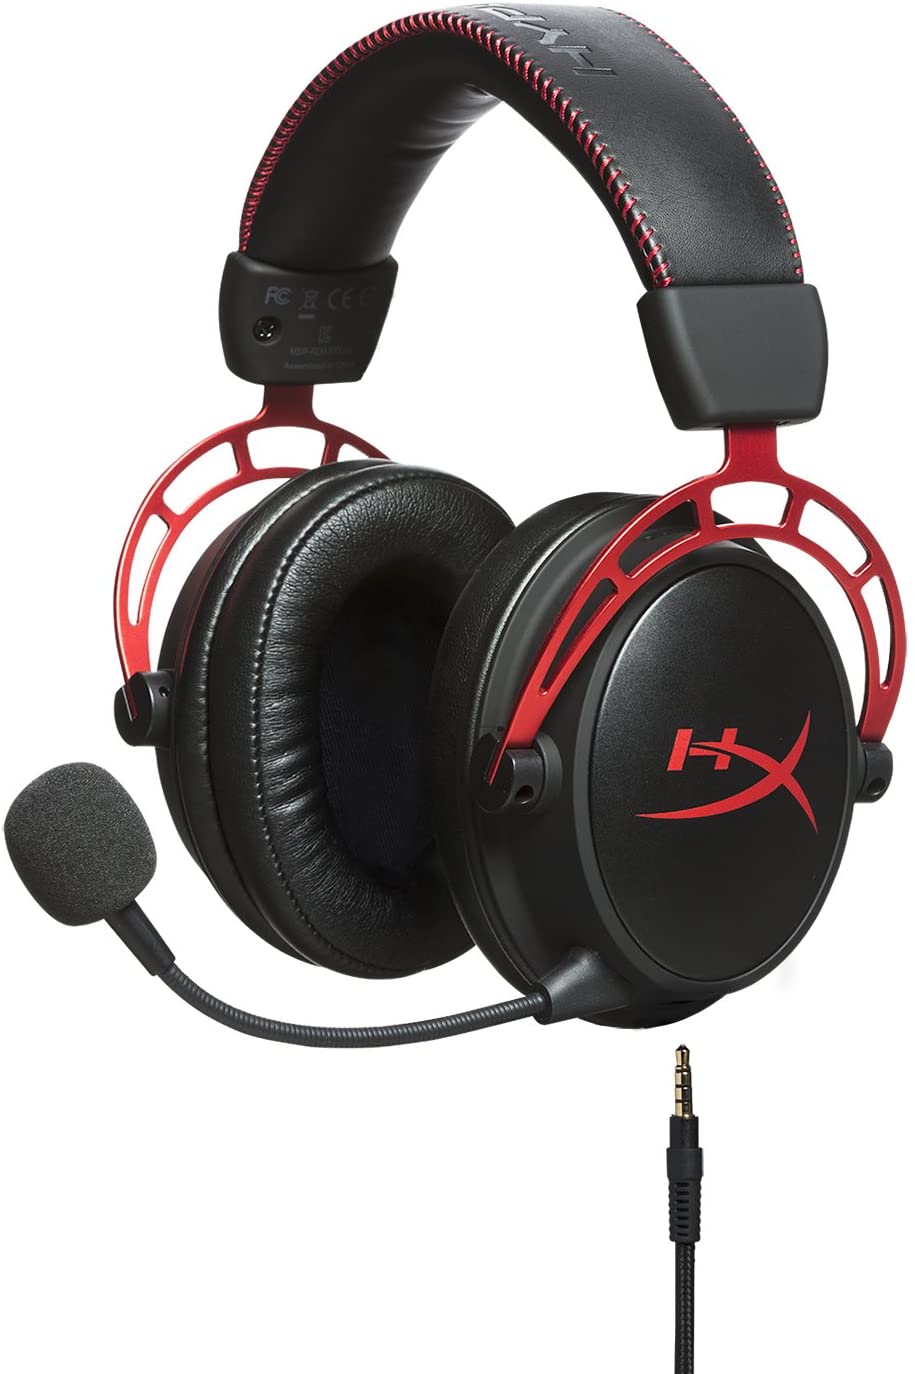 HyperX HX-HSCA-RD/AS Cloud Alpha Gaming Headset, Dual Chamber Drivers, Detachable Microphone for PC, PS4, Xbox One and Mobile Devices